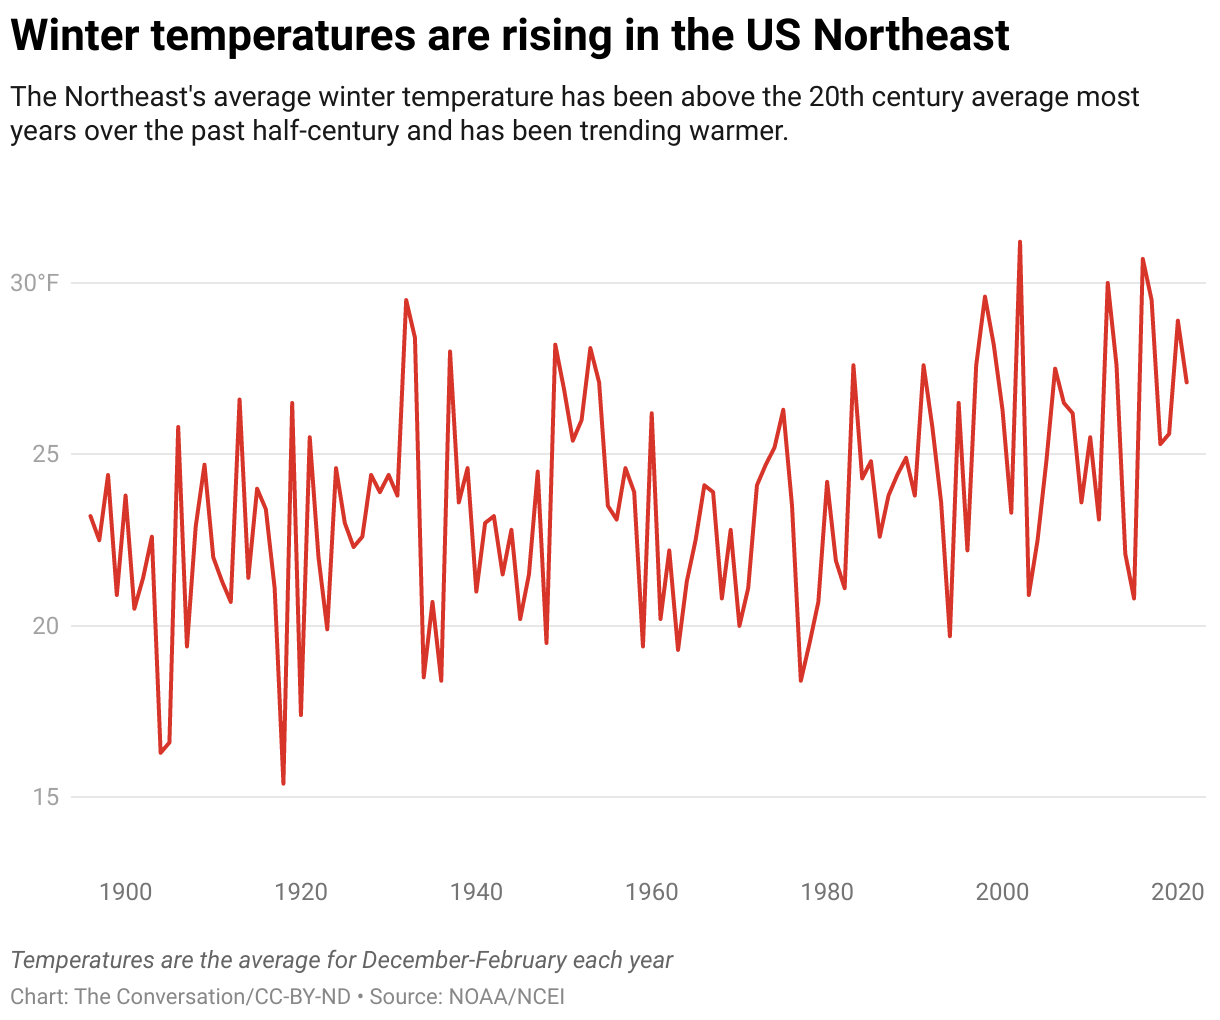 Winter temperatures are rising in the US Northeast chart.